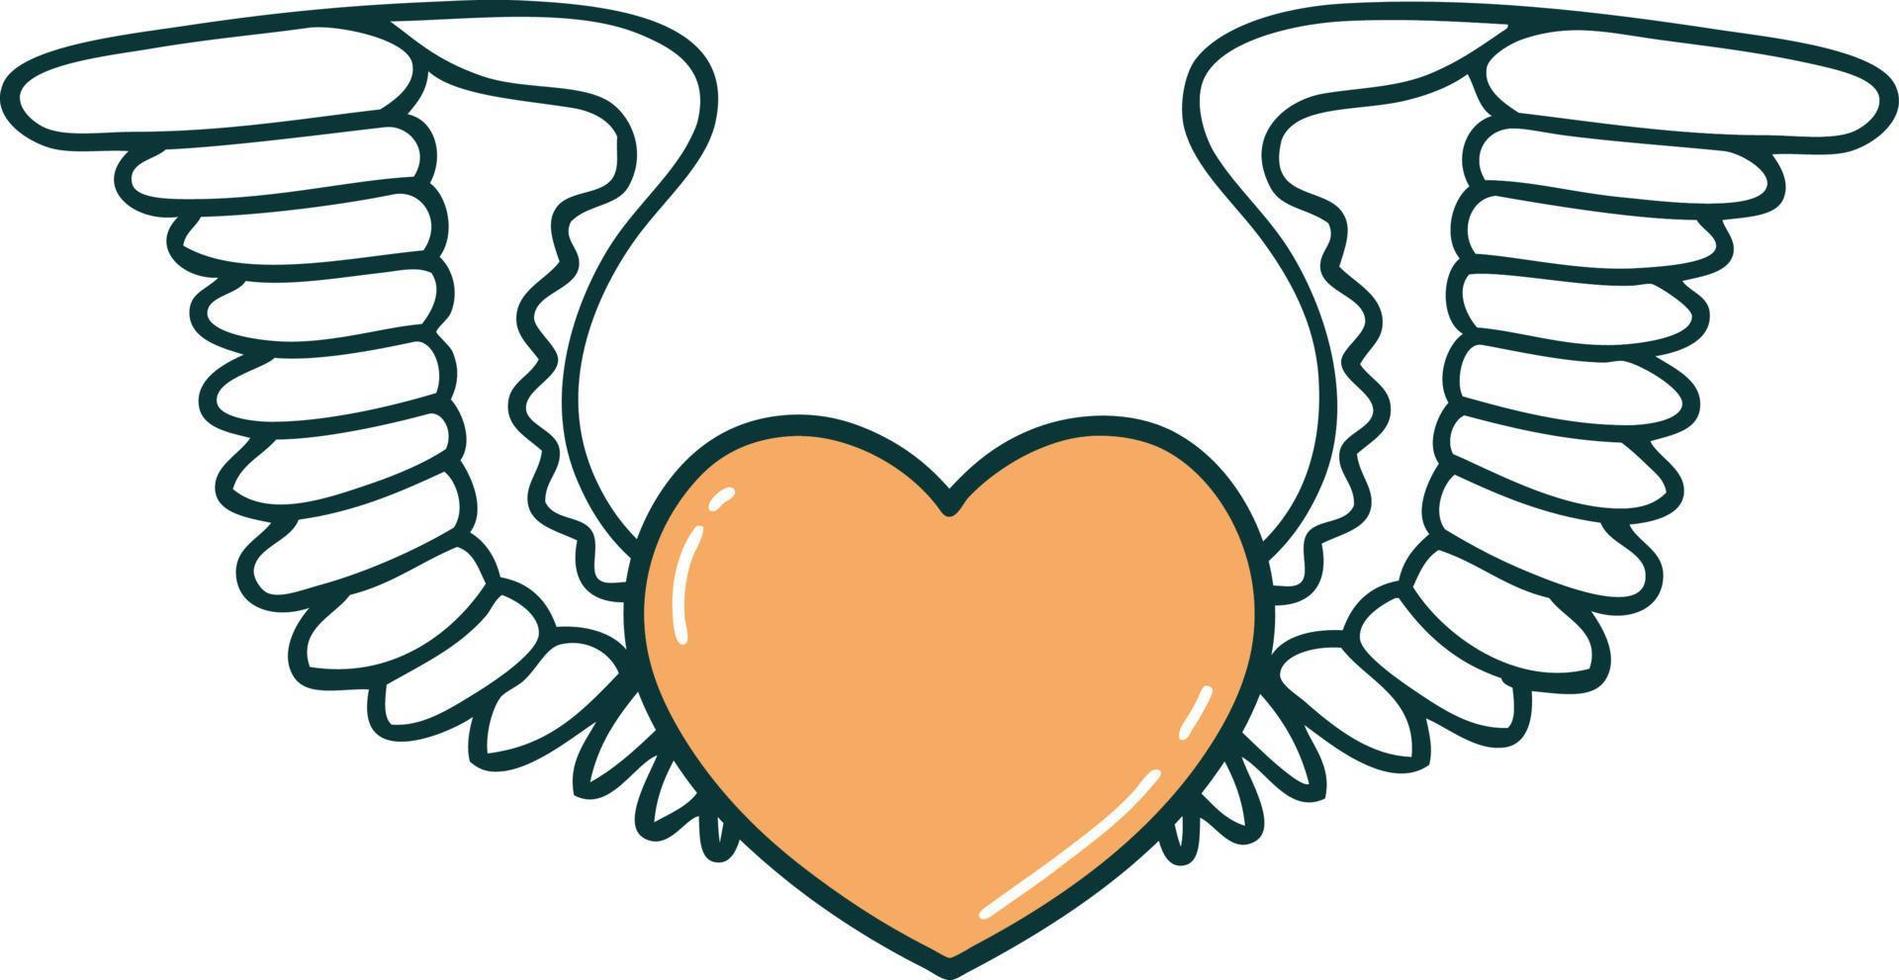 iconic tattoo style image of a heart with wings vector